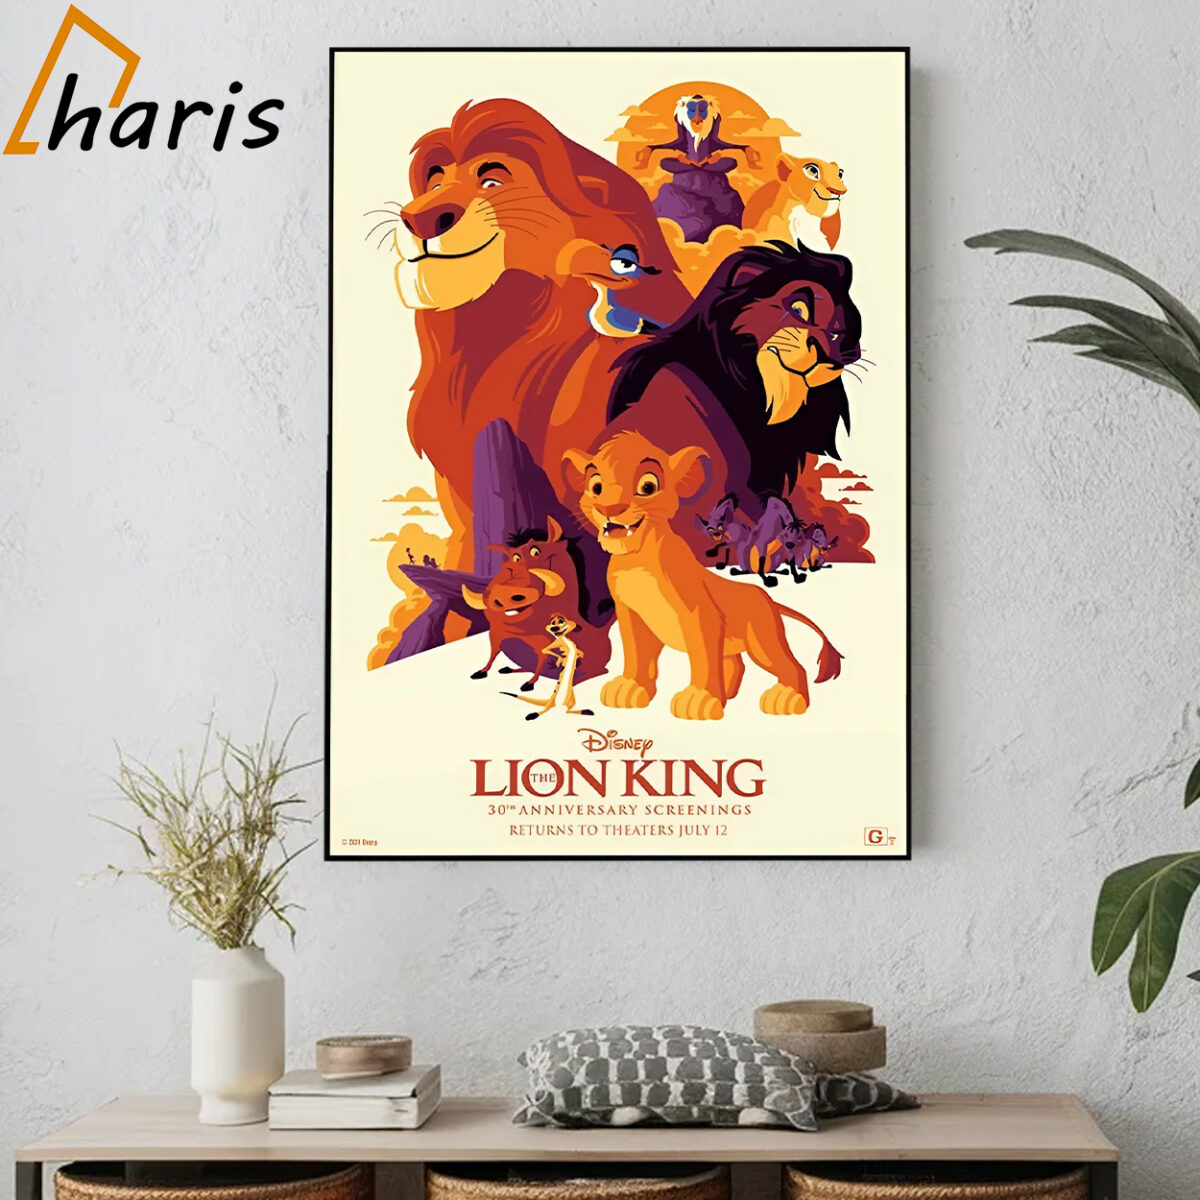 New Poster For The Lion King Releasing In Theaters On July 12 Poster 2